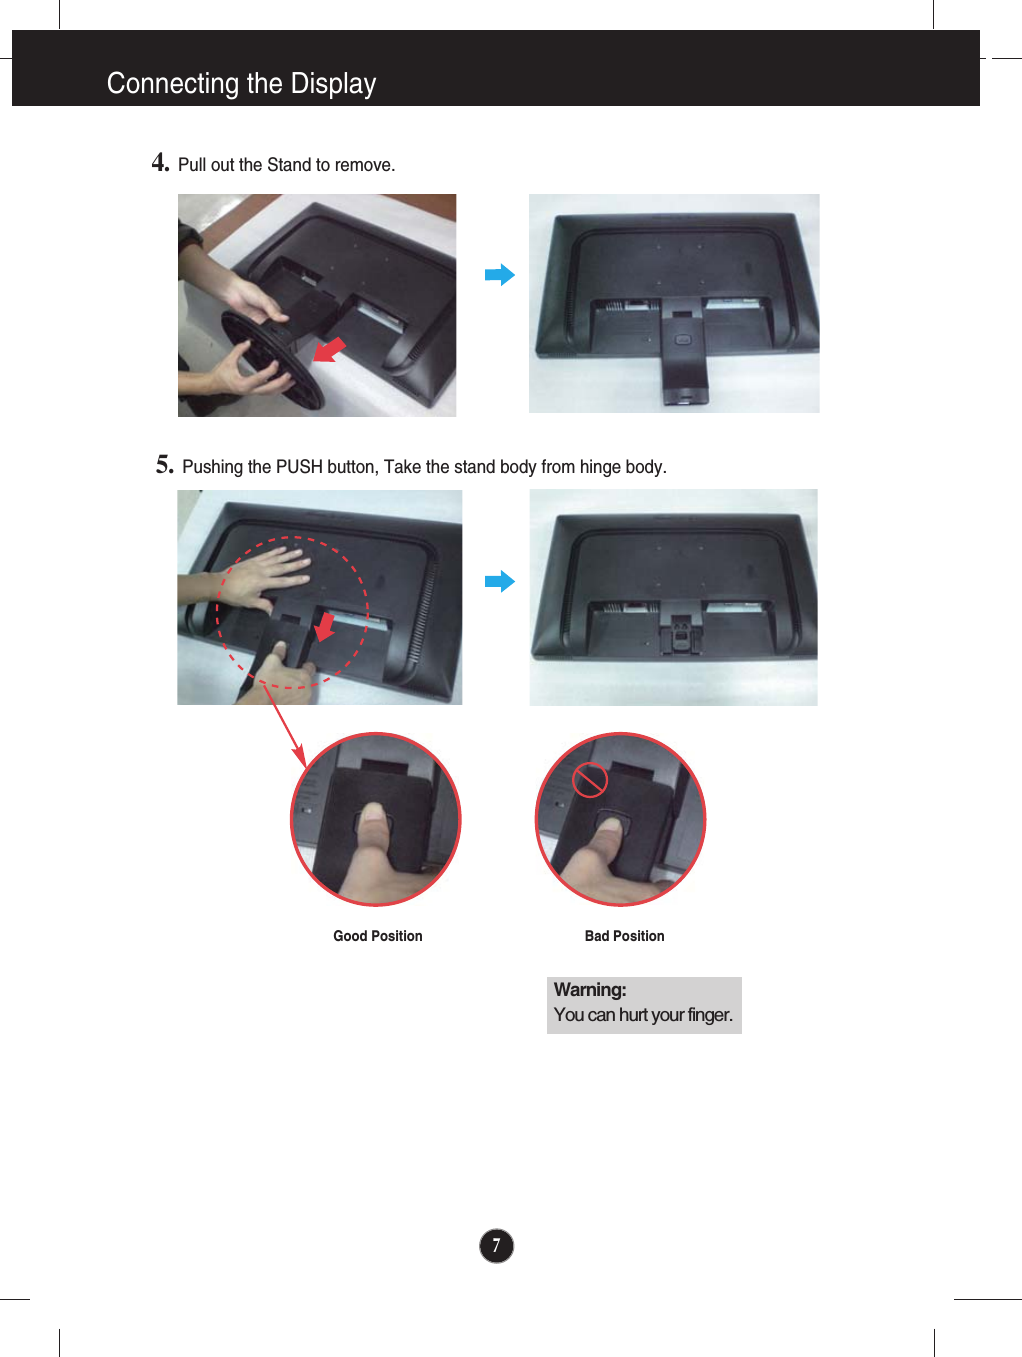 7Connecting the Display4.Pull out the Stand to remove.5.Pushing the PUSH button, Take the stand body from hinge body.Good Position Bad PositionWarning:You can hurt your finger.